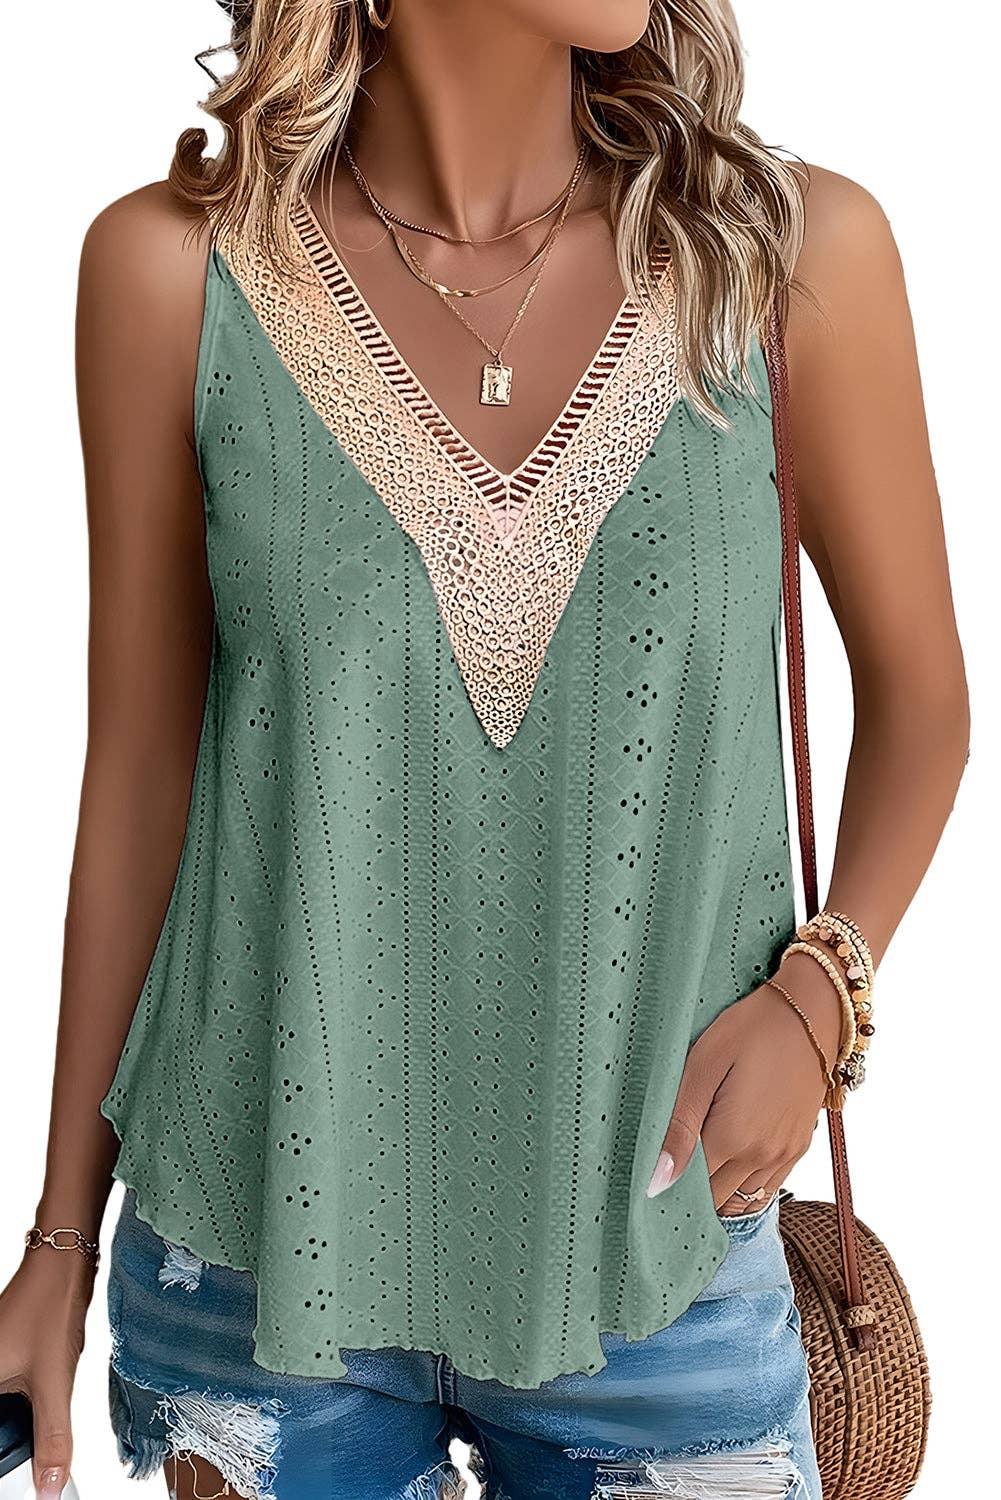 Mist Green Eyelet Lace Trim Tank - Strawberry Moon Boutique